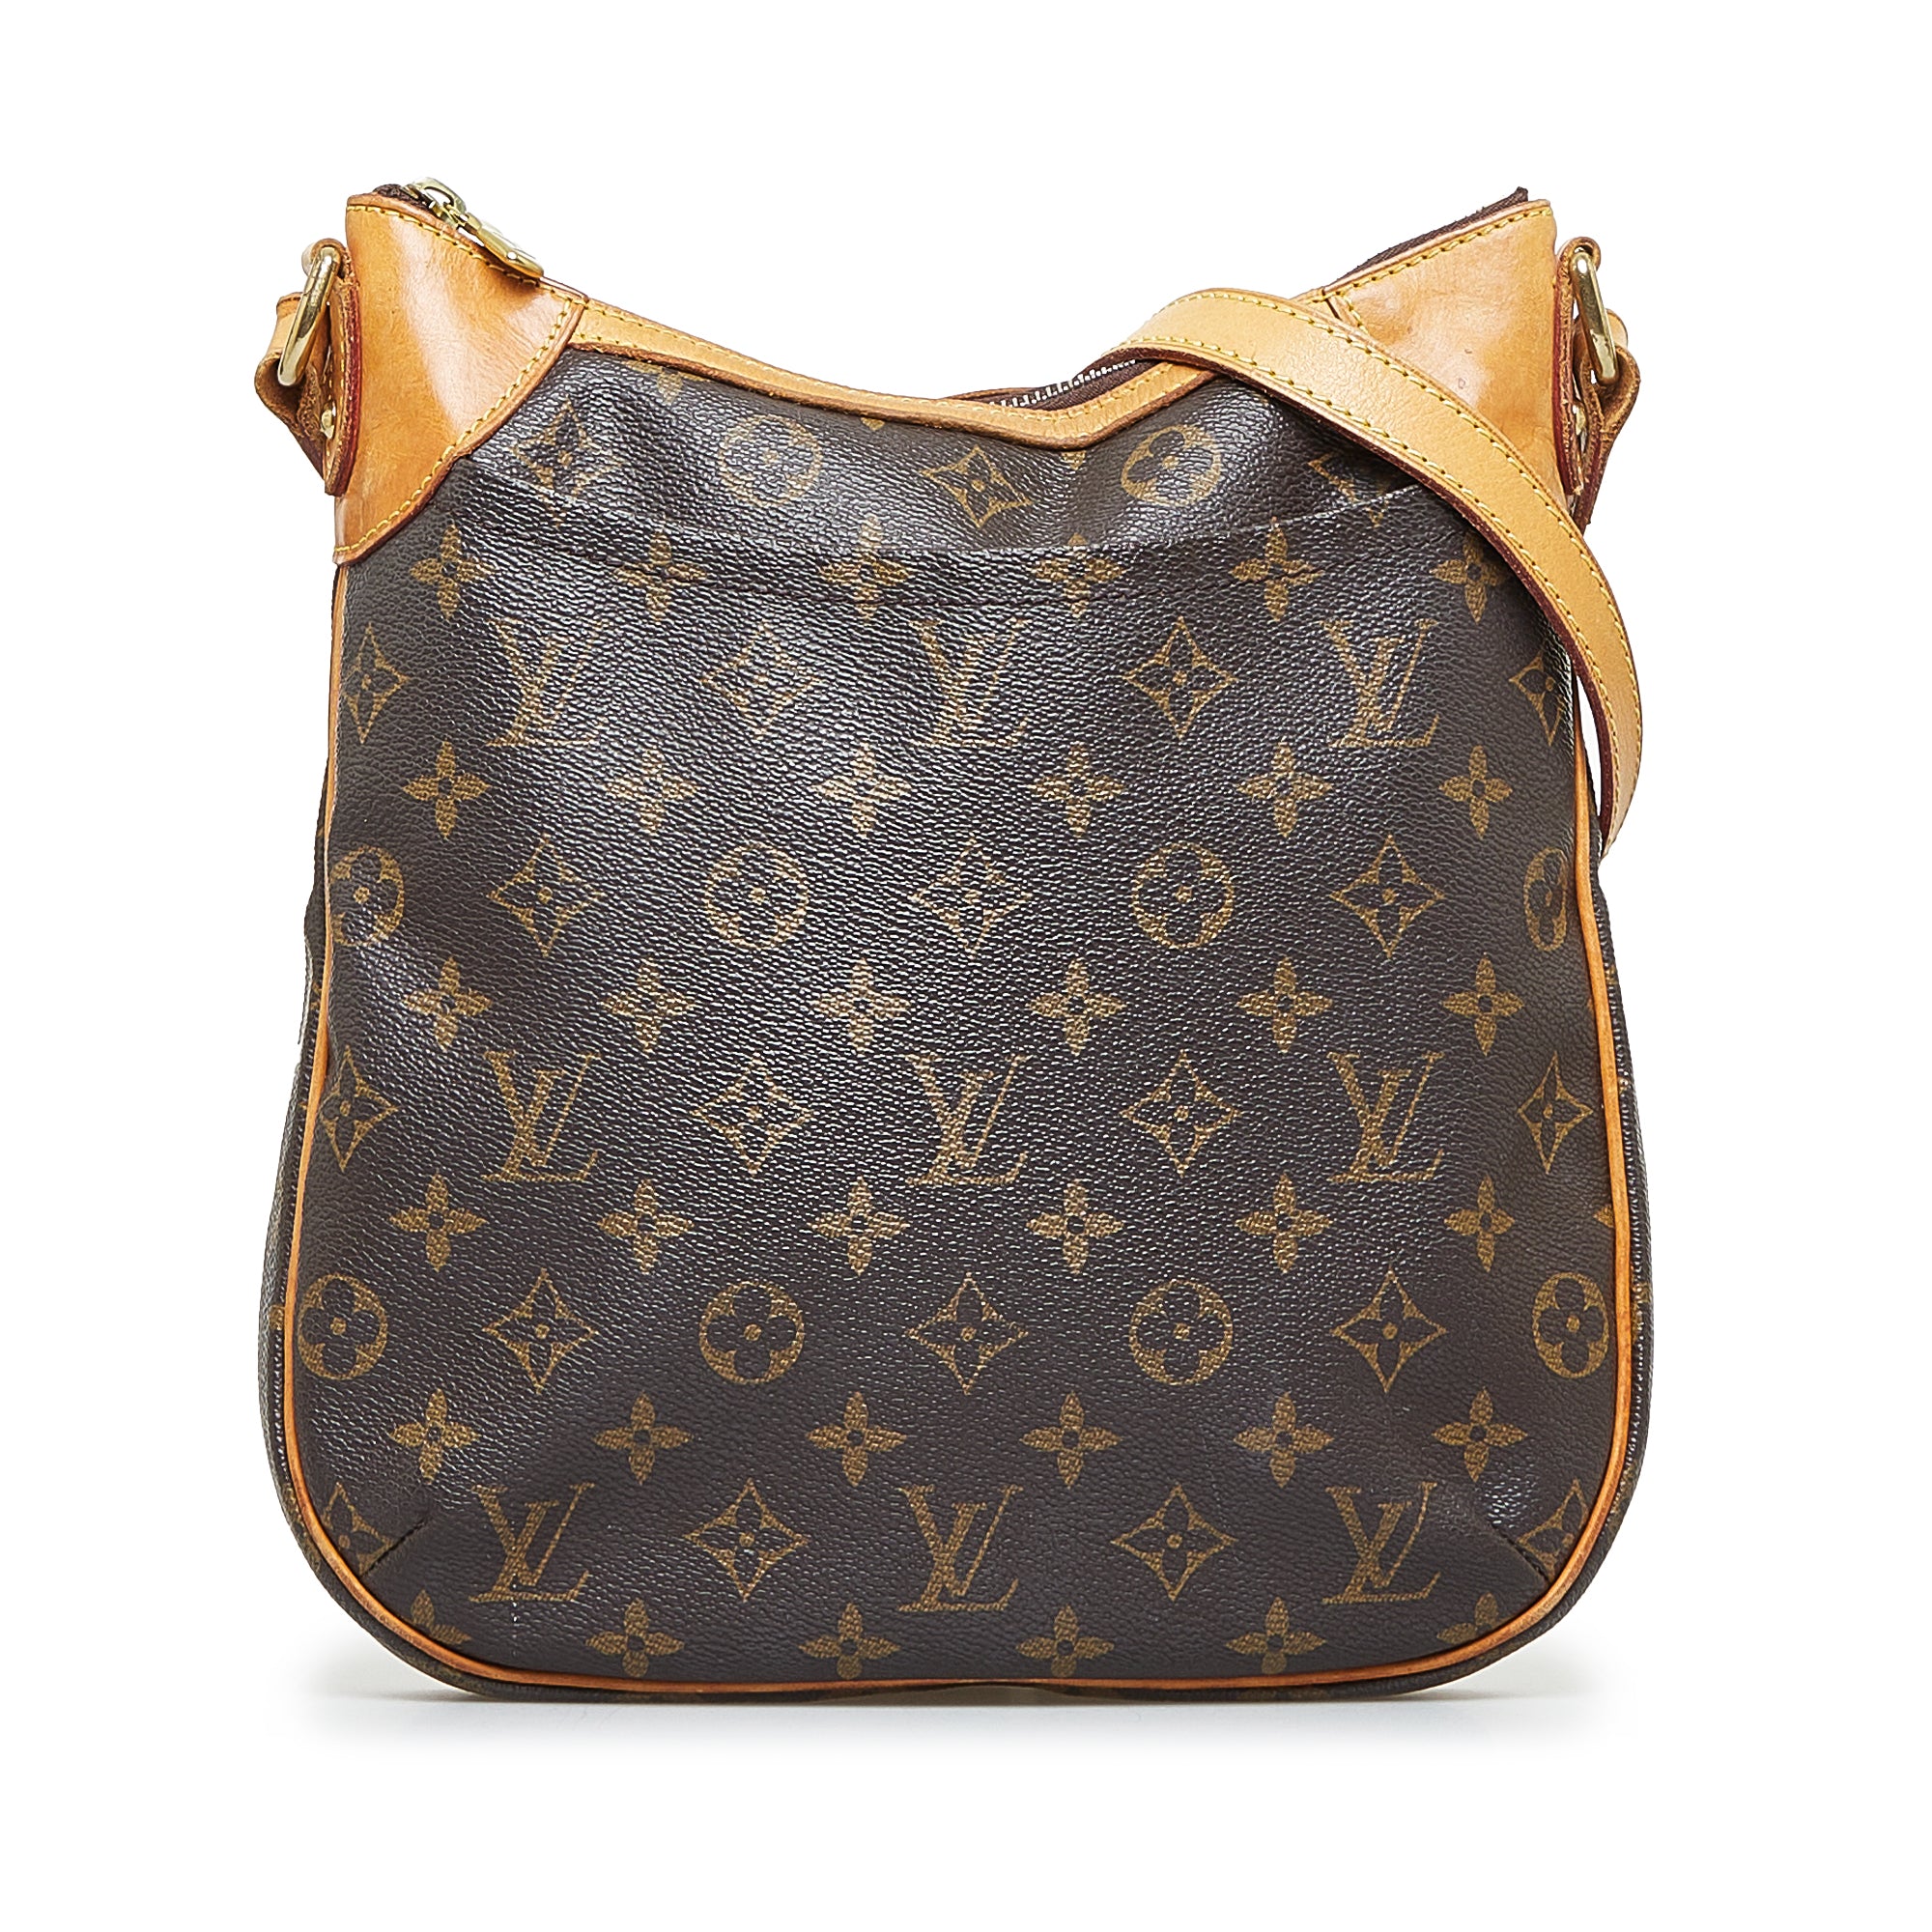 LOUIS VUITTON Odeon PM Crossbody Shoulder Bag M56390Product  Code2100300970510BRAND OFF Online Store